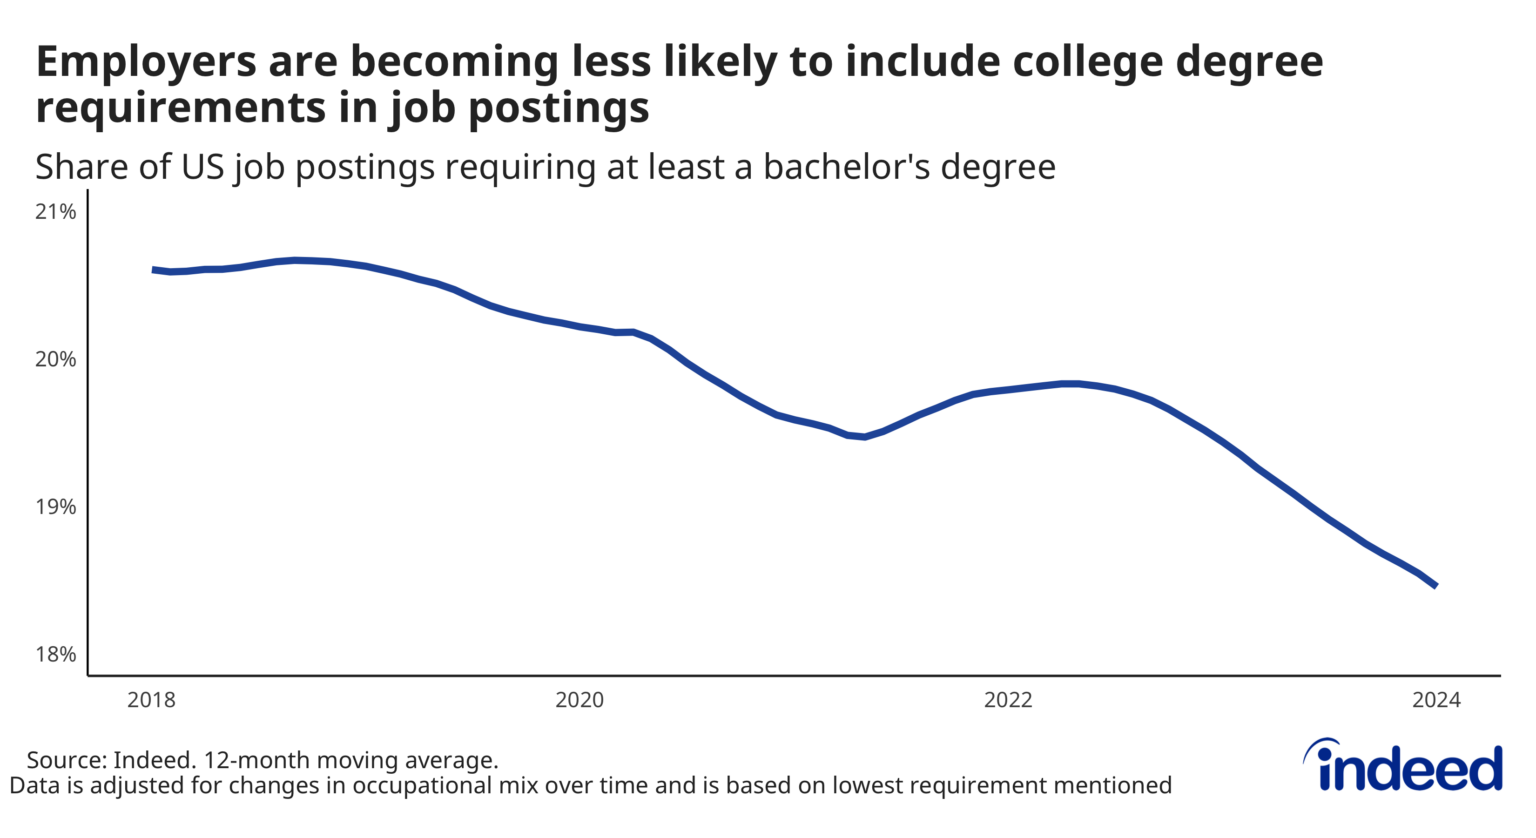 Graph: Share of US job postings requiring at least a bachelor’s degree